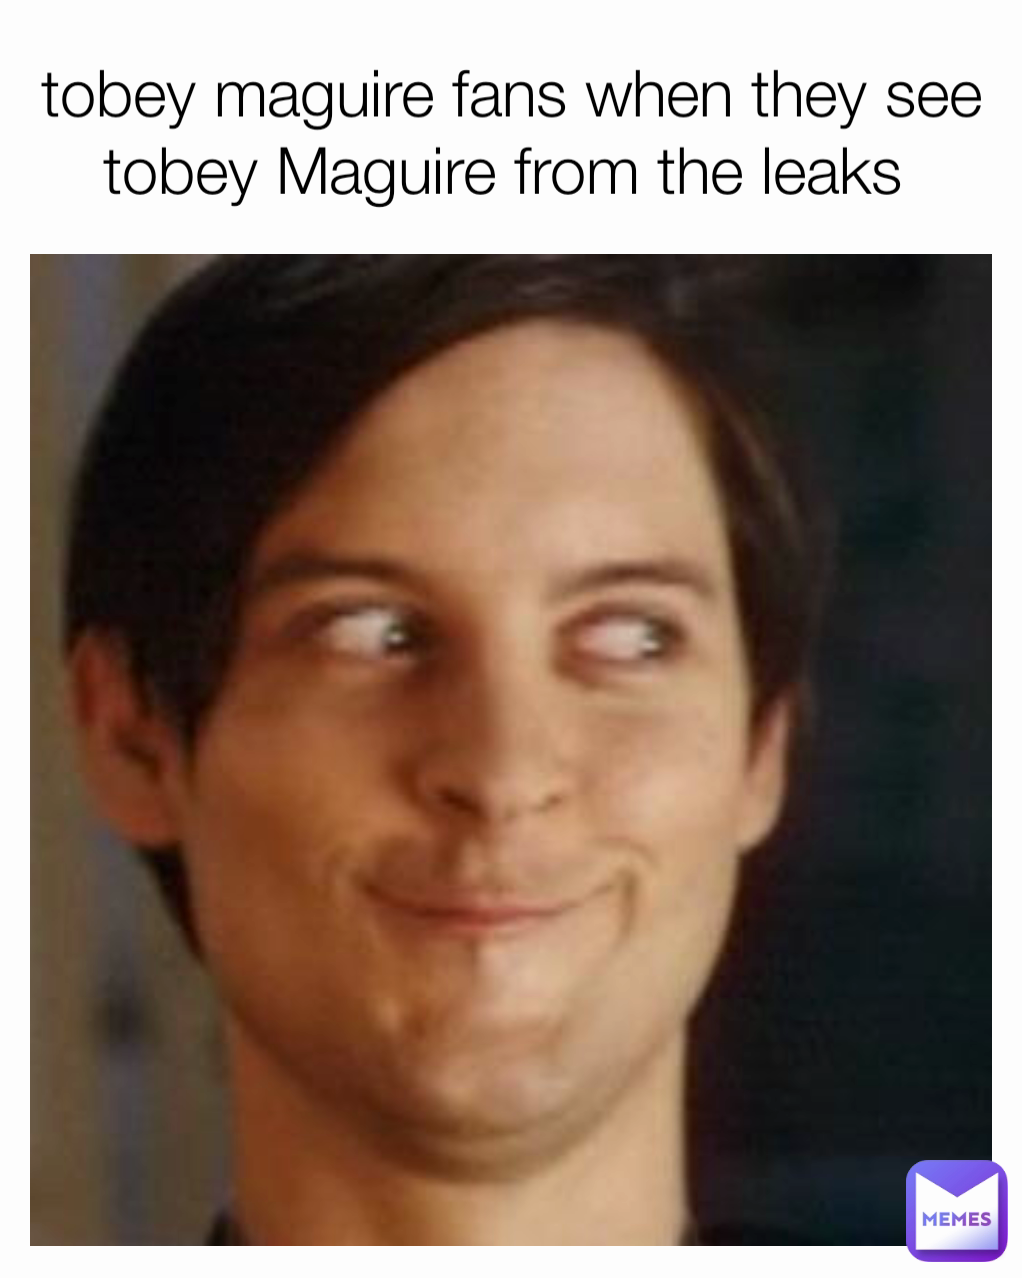 tobey maguire fans when they see tobey Maguire from the leaks 